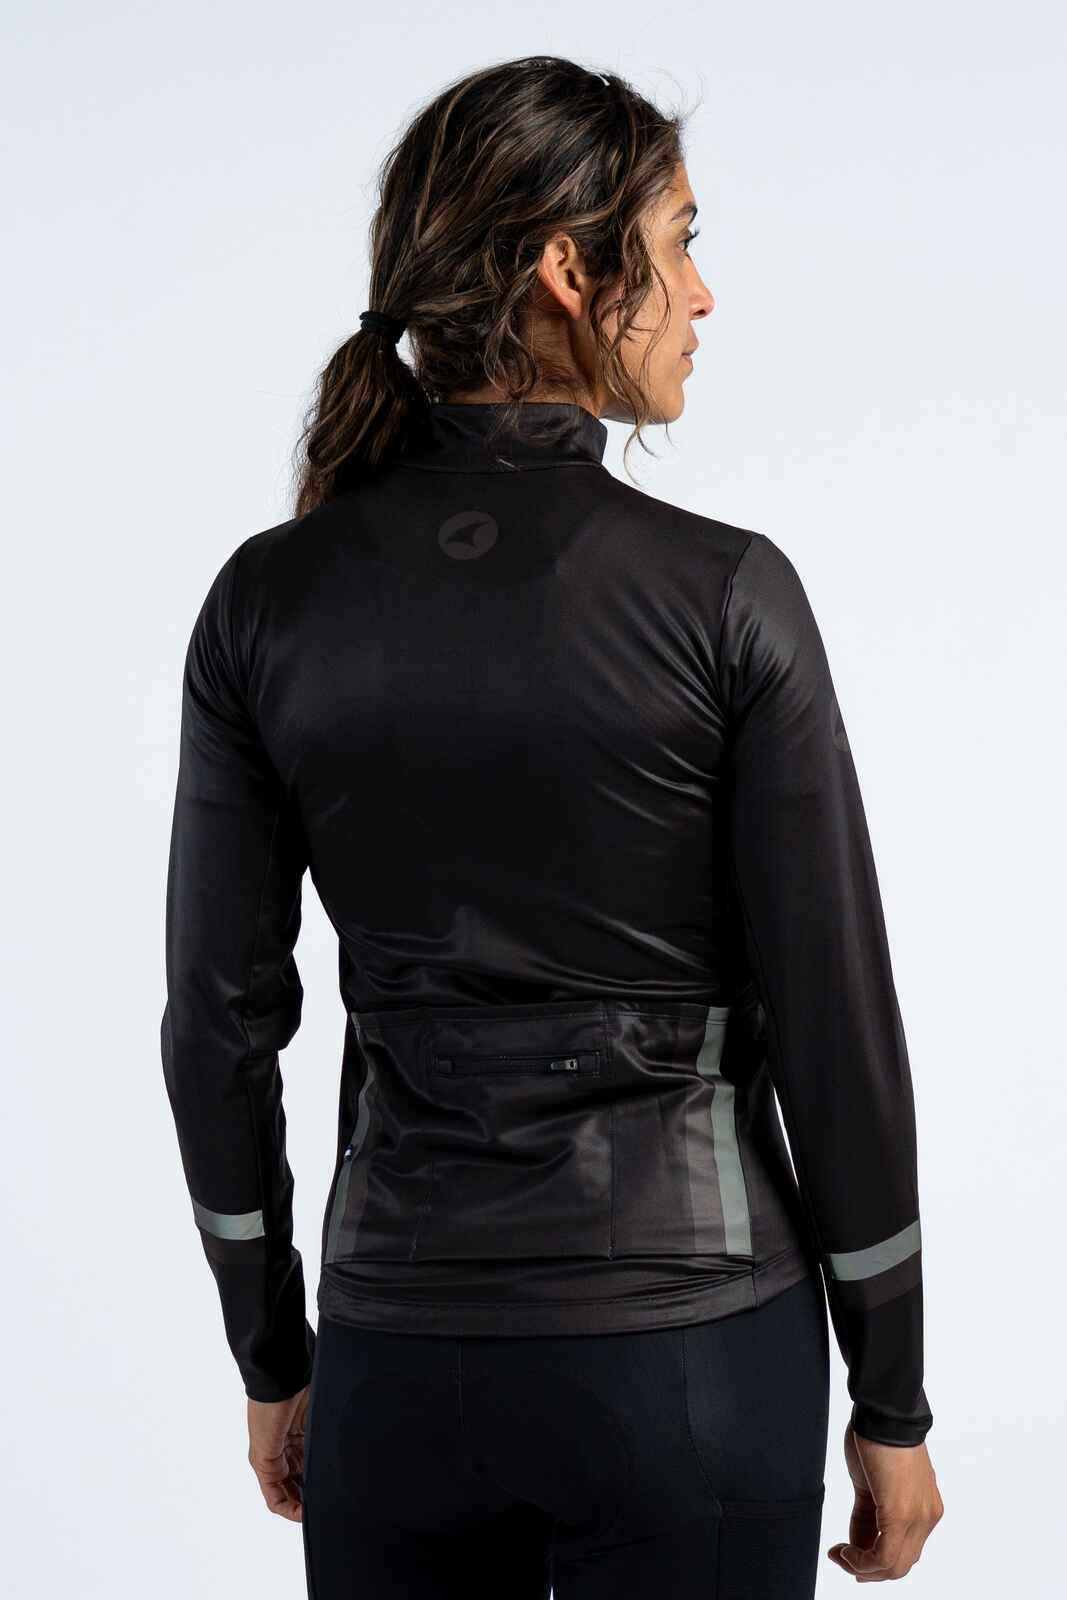 Women's Black Thermal Cycling Jersey - Back View